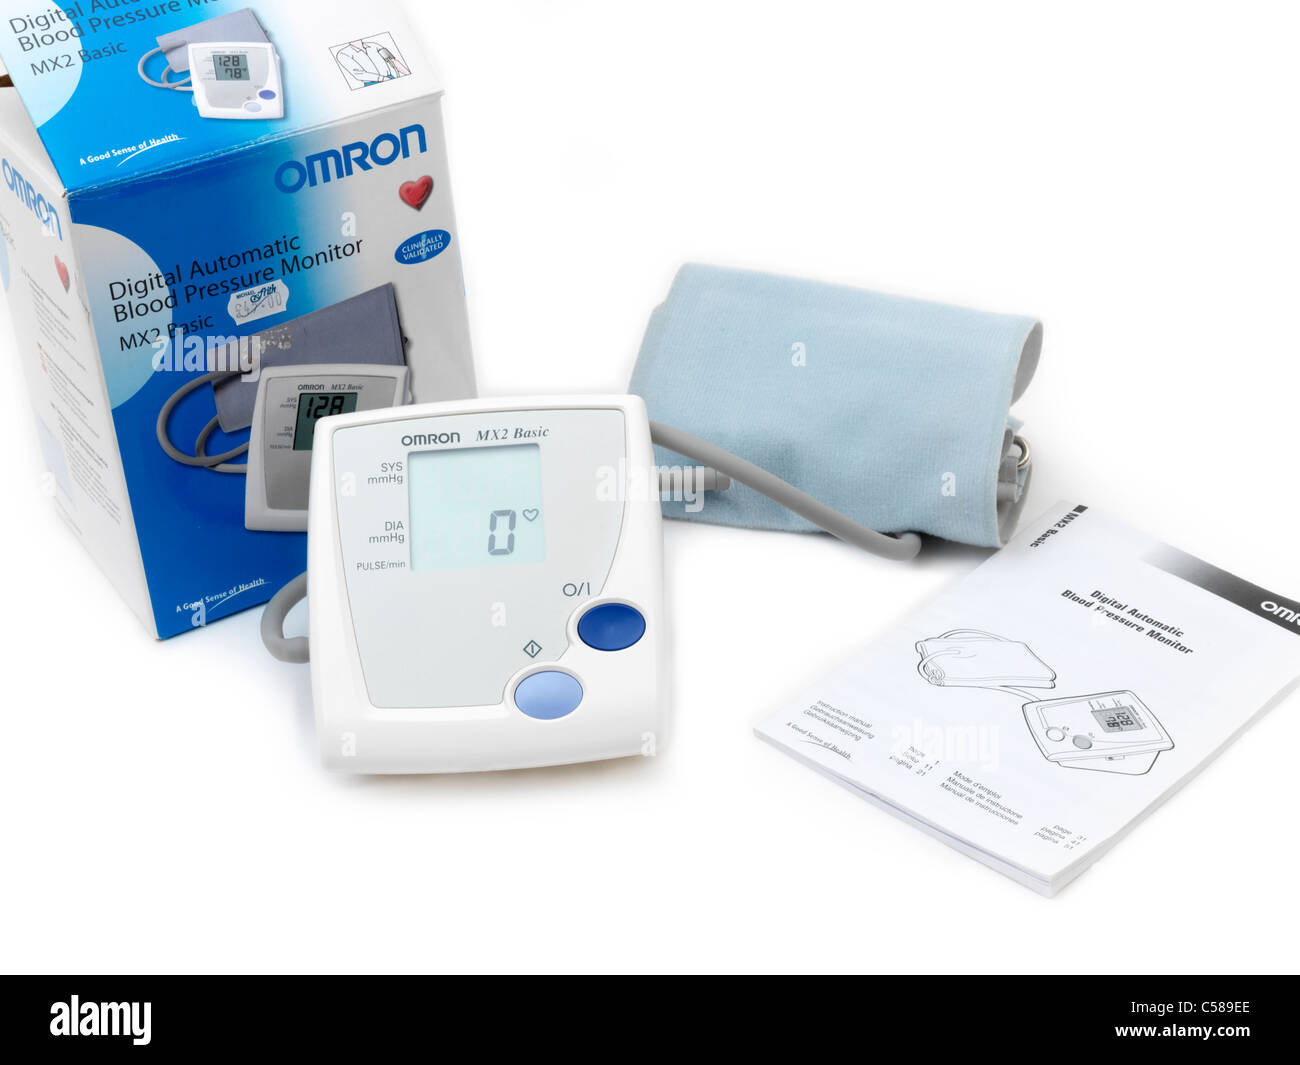 Digital Automatic Blood Pressure Monitor And Instruction Book Stock Photo